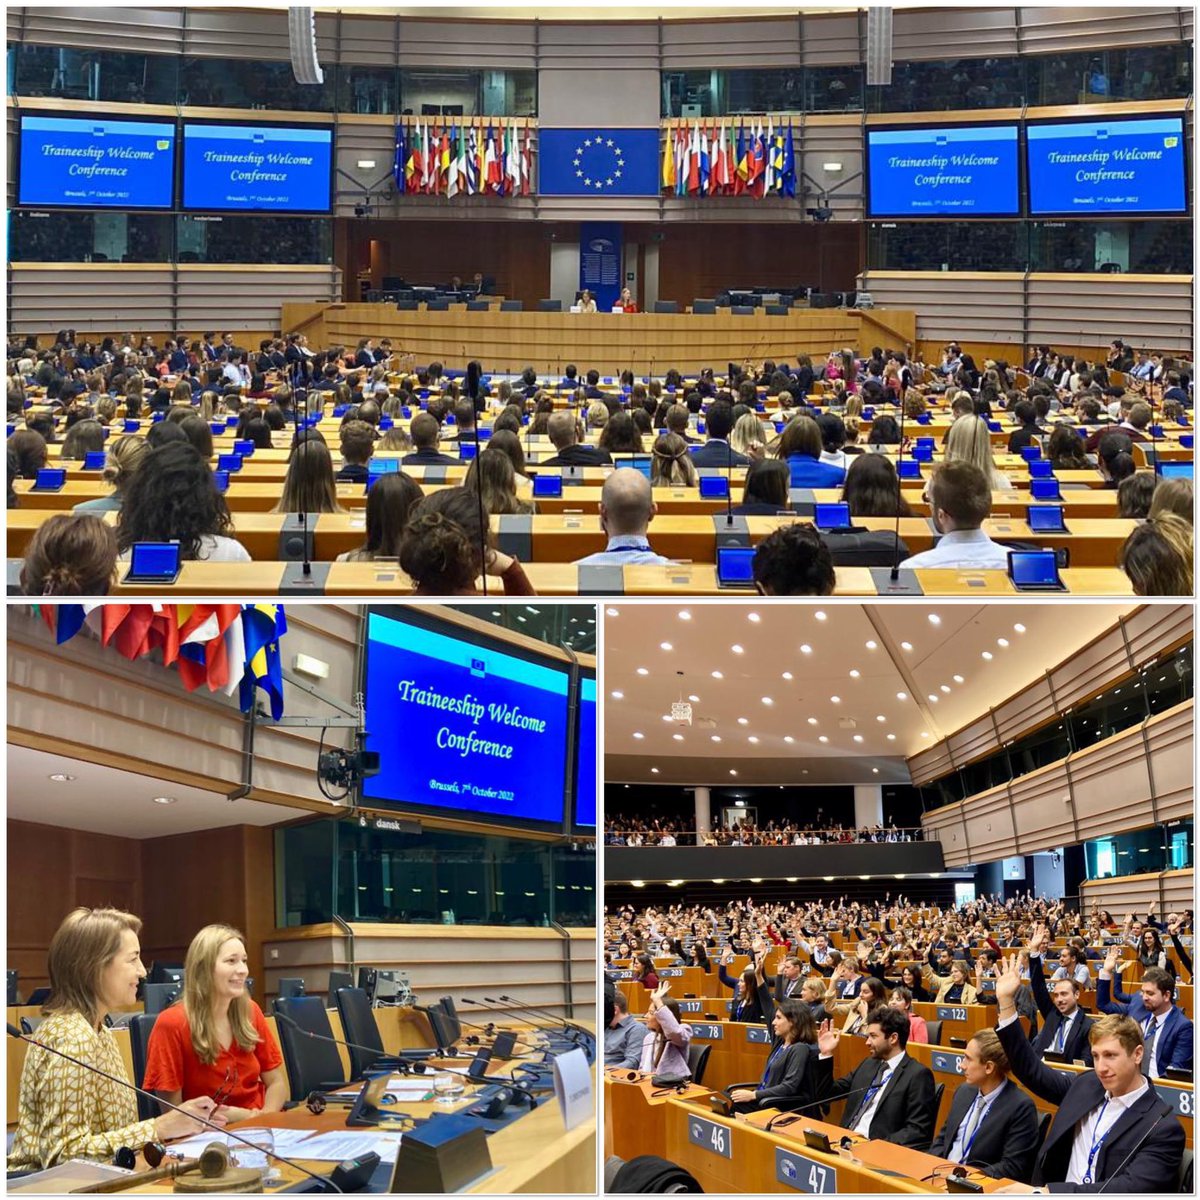 A big welcome to the 1000 new #EUtrainees 🎉 Seeing so many bright, smiley, excited young faces fills me w/ confidence for the future! #Europe needs all its dreamers and makers! Thank you @Kira_MPH, youngest MEP, for being w/ us today! #EYY2022 #Erasmusplus35Years #BlueBook